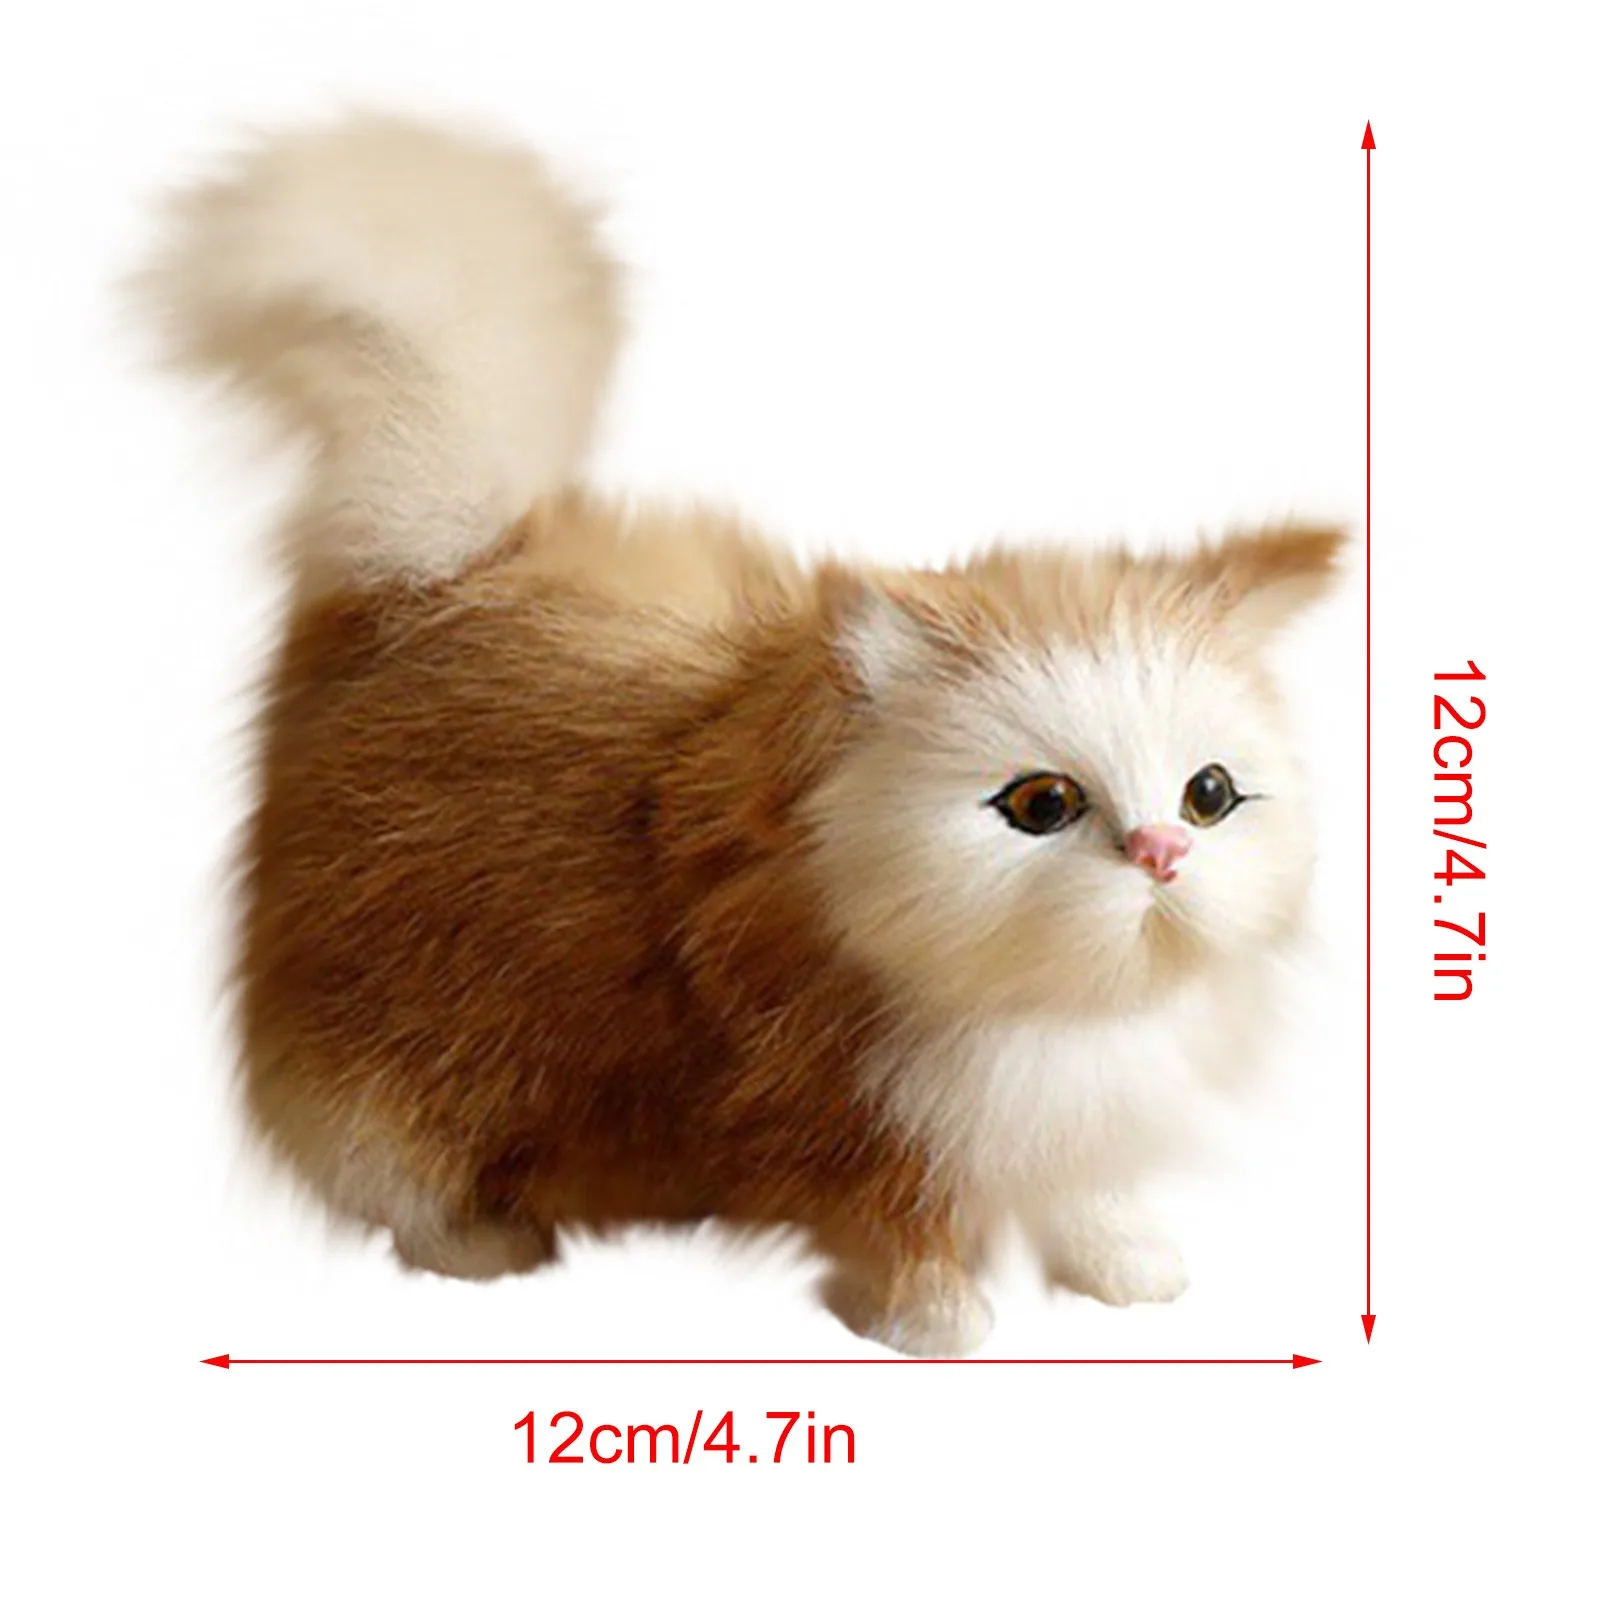 Details about   2020 Plush Cat Soft Toys Doll Lifelike Simulation Kids Girls Xmas Gifts 3 Colors 